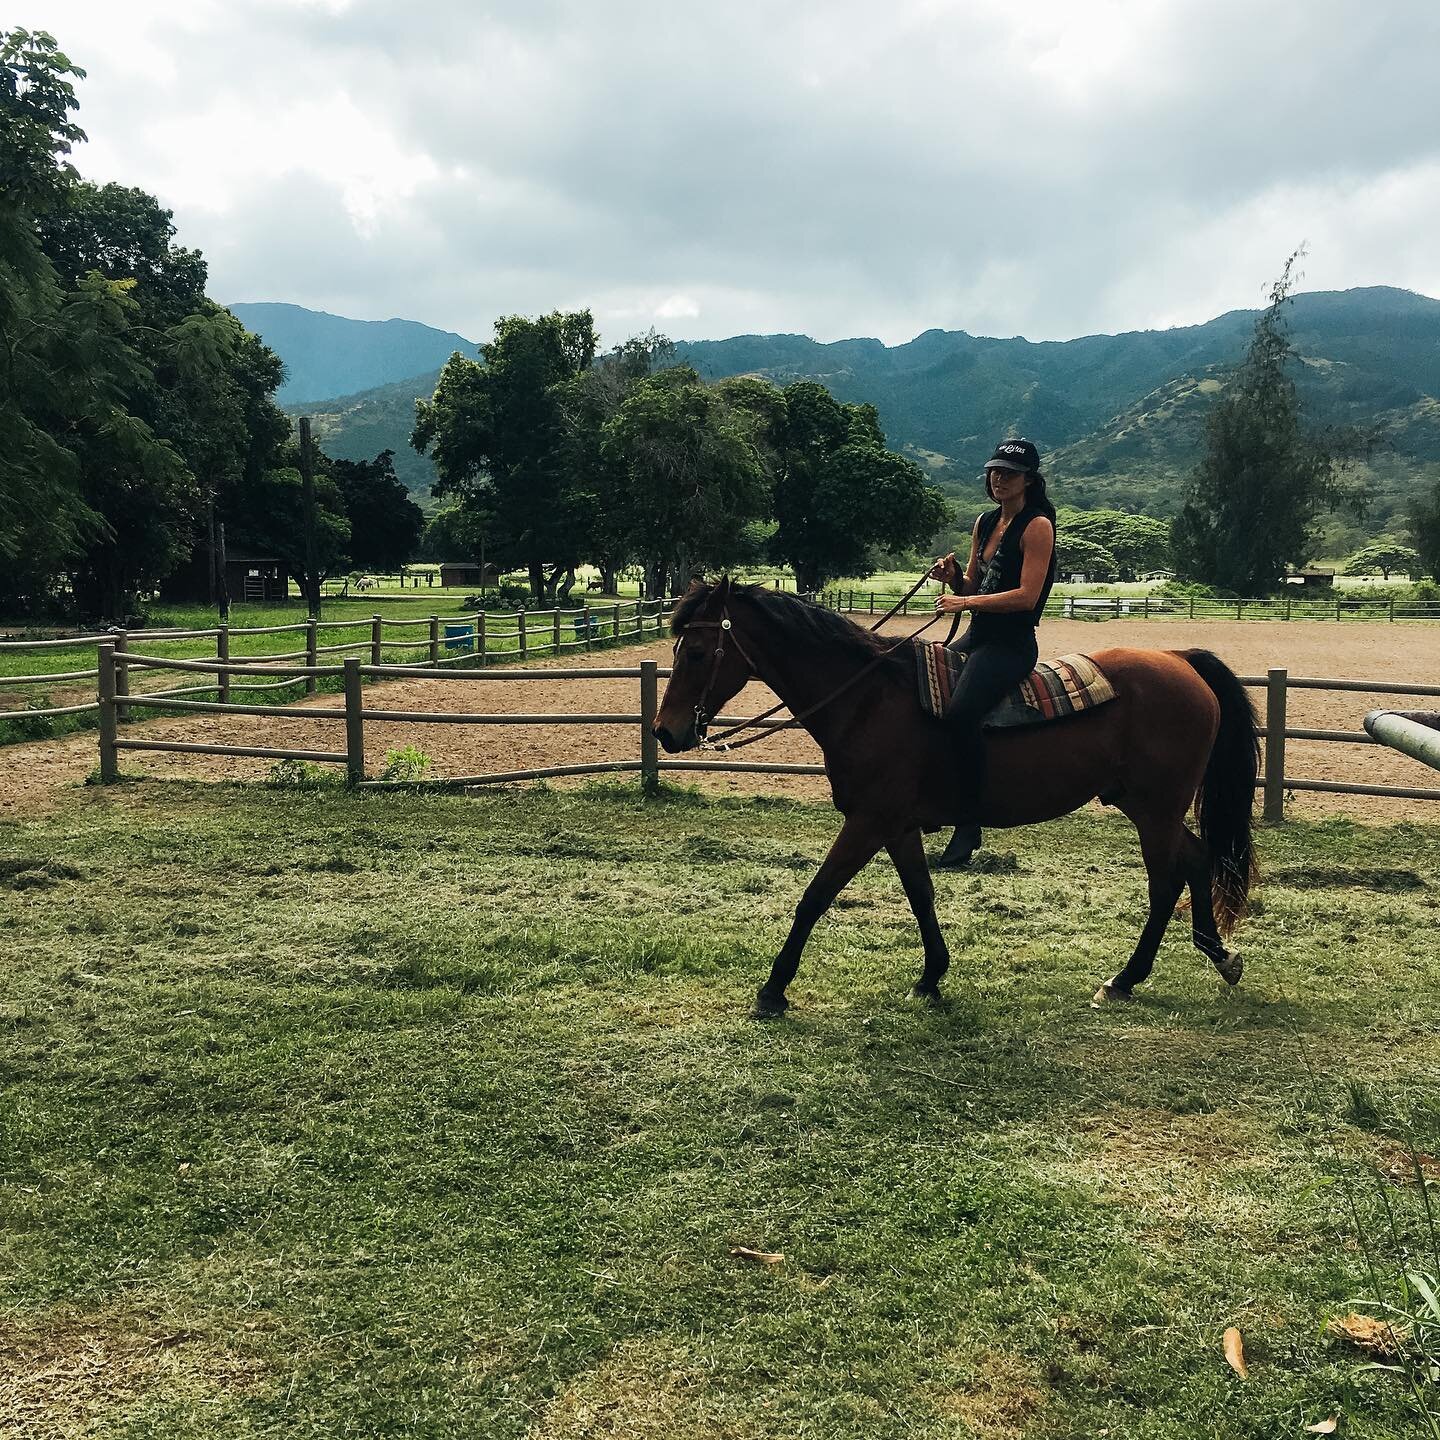 horse medicine touches the very heart and soul of all who love to run free 🤍 

Their spirit encompasses determination, endurance, valor, freedom, travel, beauty, majesty, and spirit. May horse wisdom aids us all in connecting with our soul, intuitio